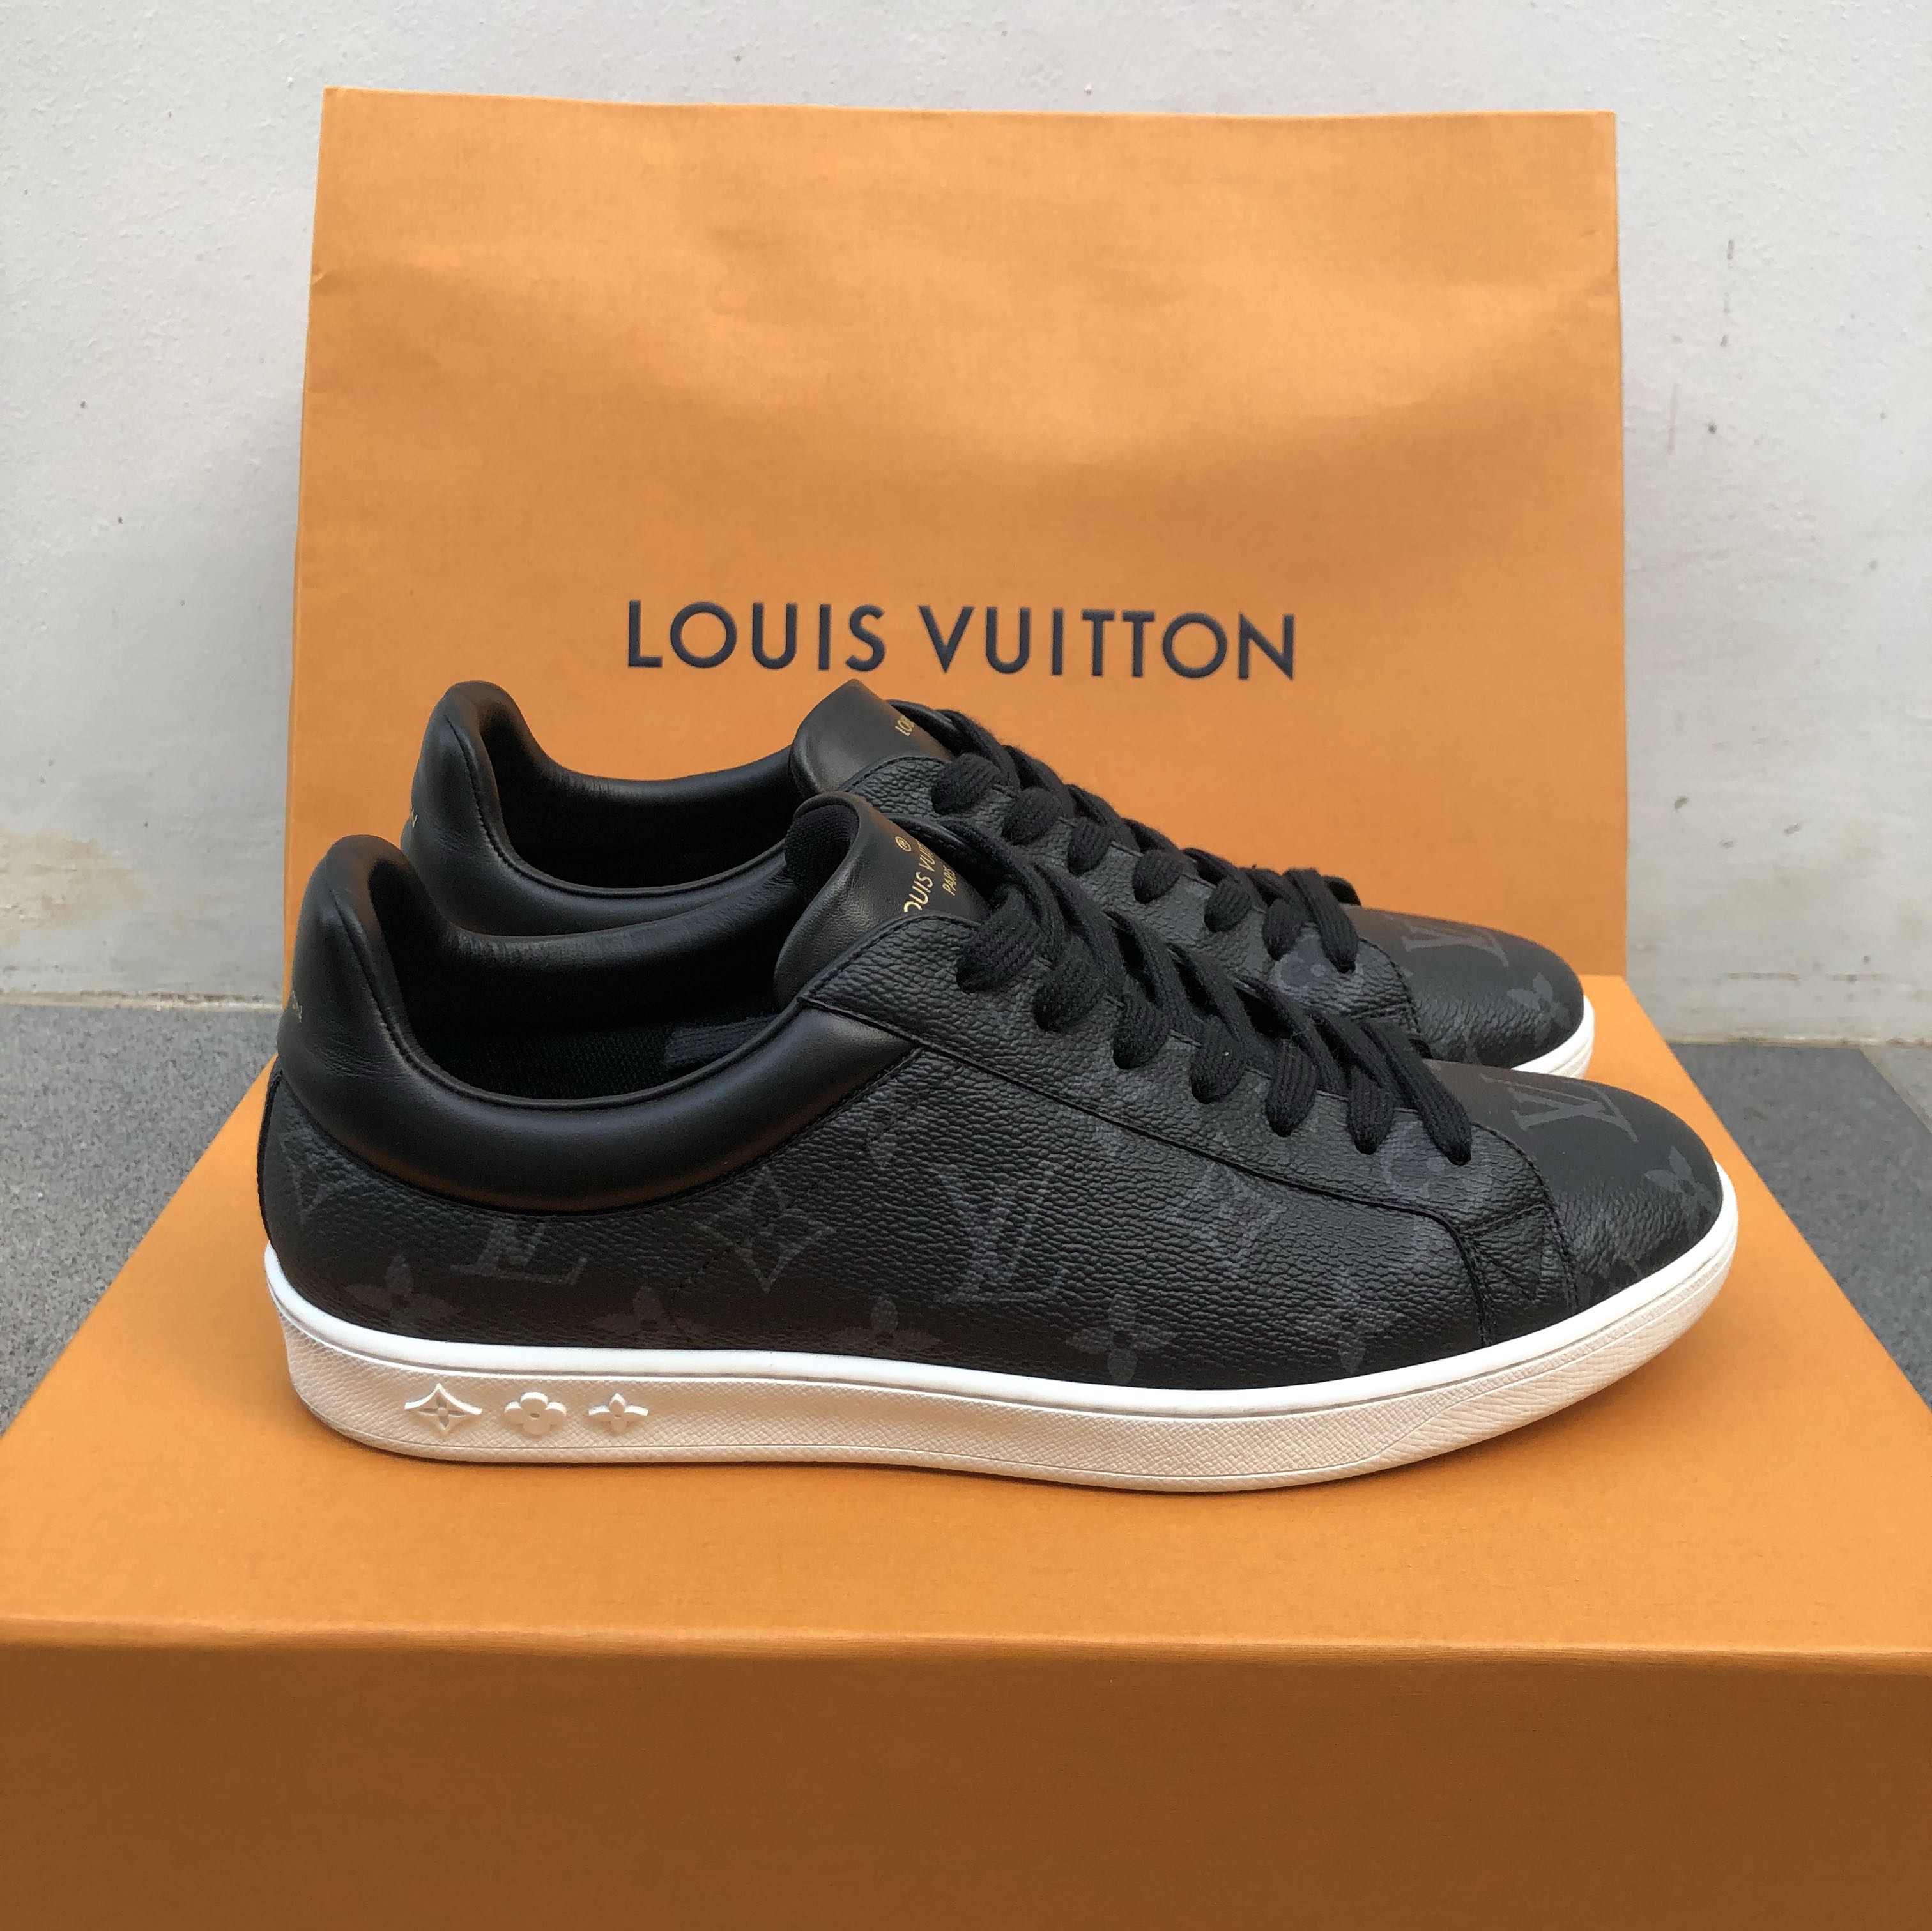 Louis Vuitton LUXEMBOURG Sneakers LV Monogram Shoes Mens US 9